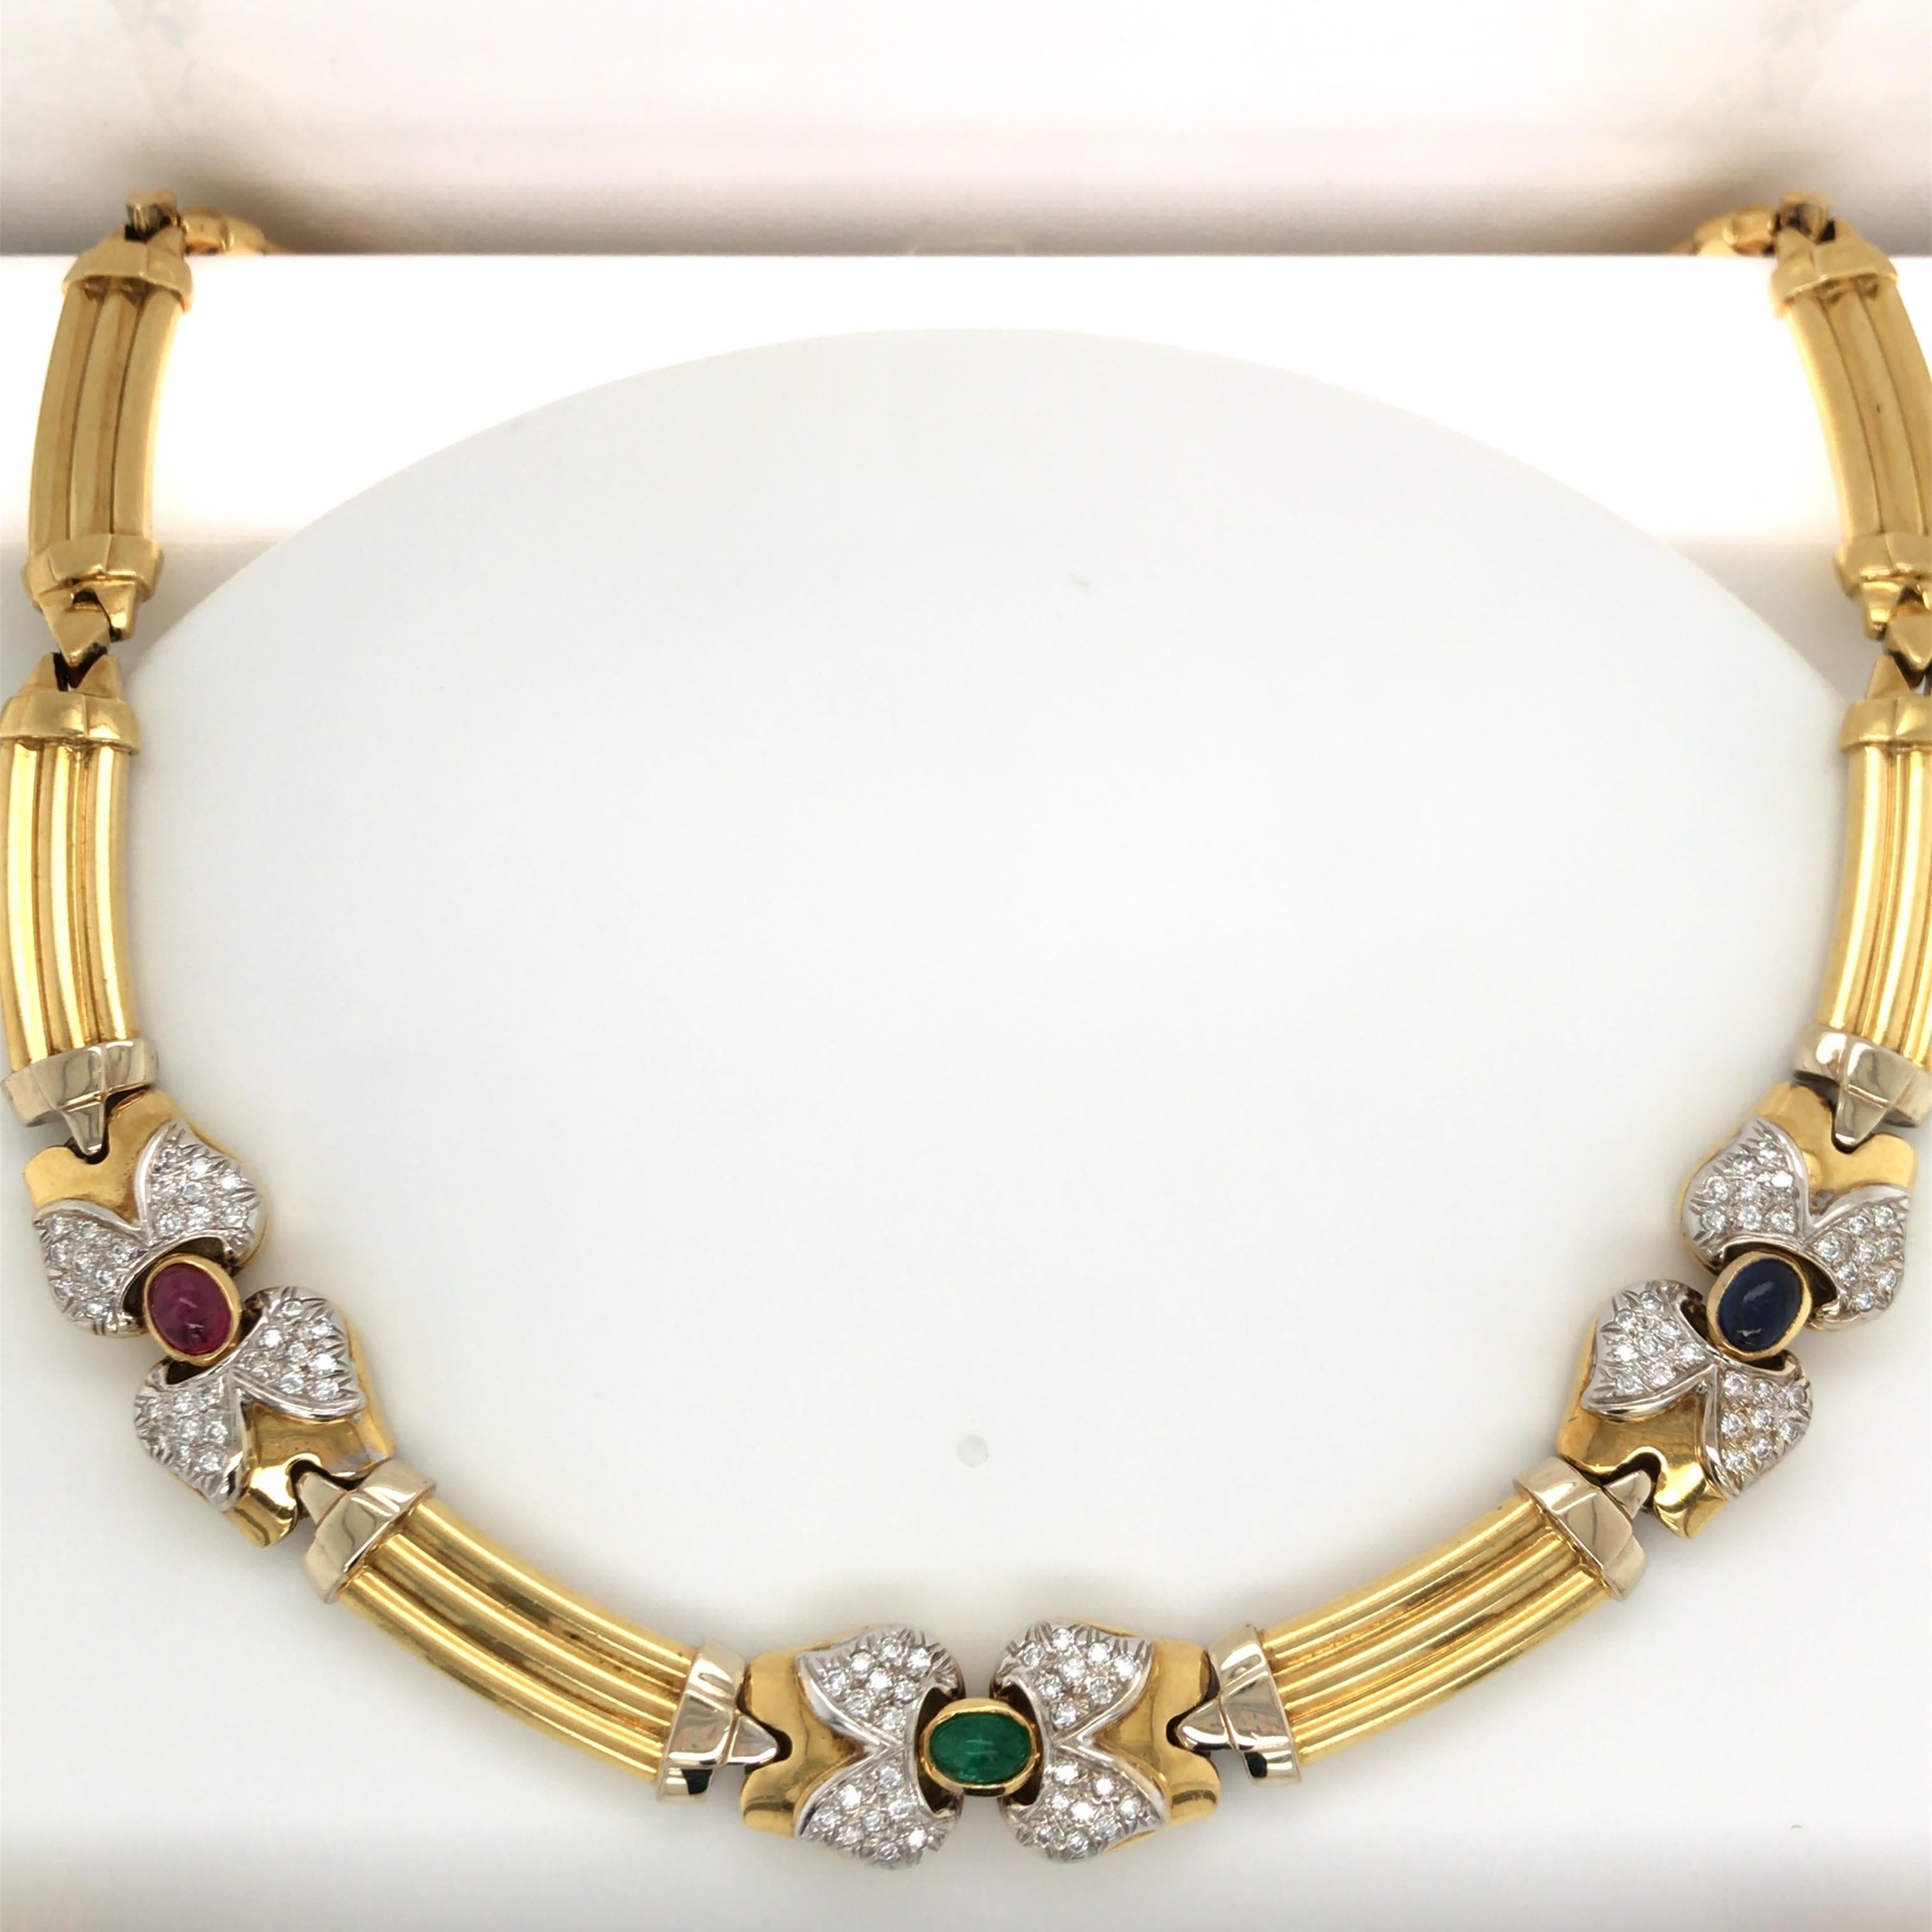 Vintage 18K Yellow gold necklace featuring three ovals of an Emerald, Sapphire and Ruby flanked with round brilliants in a bow motif. 